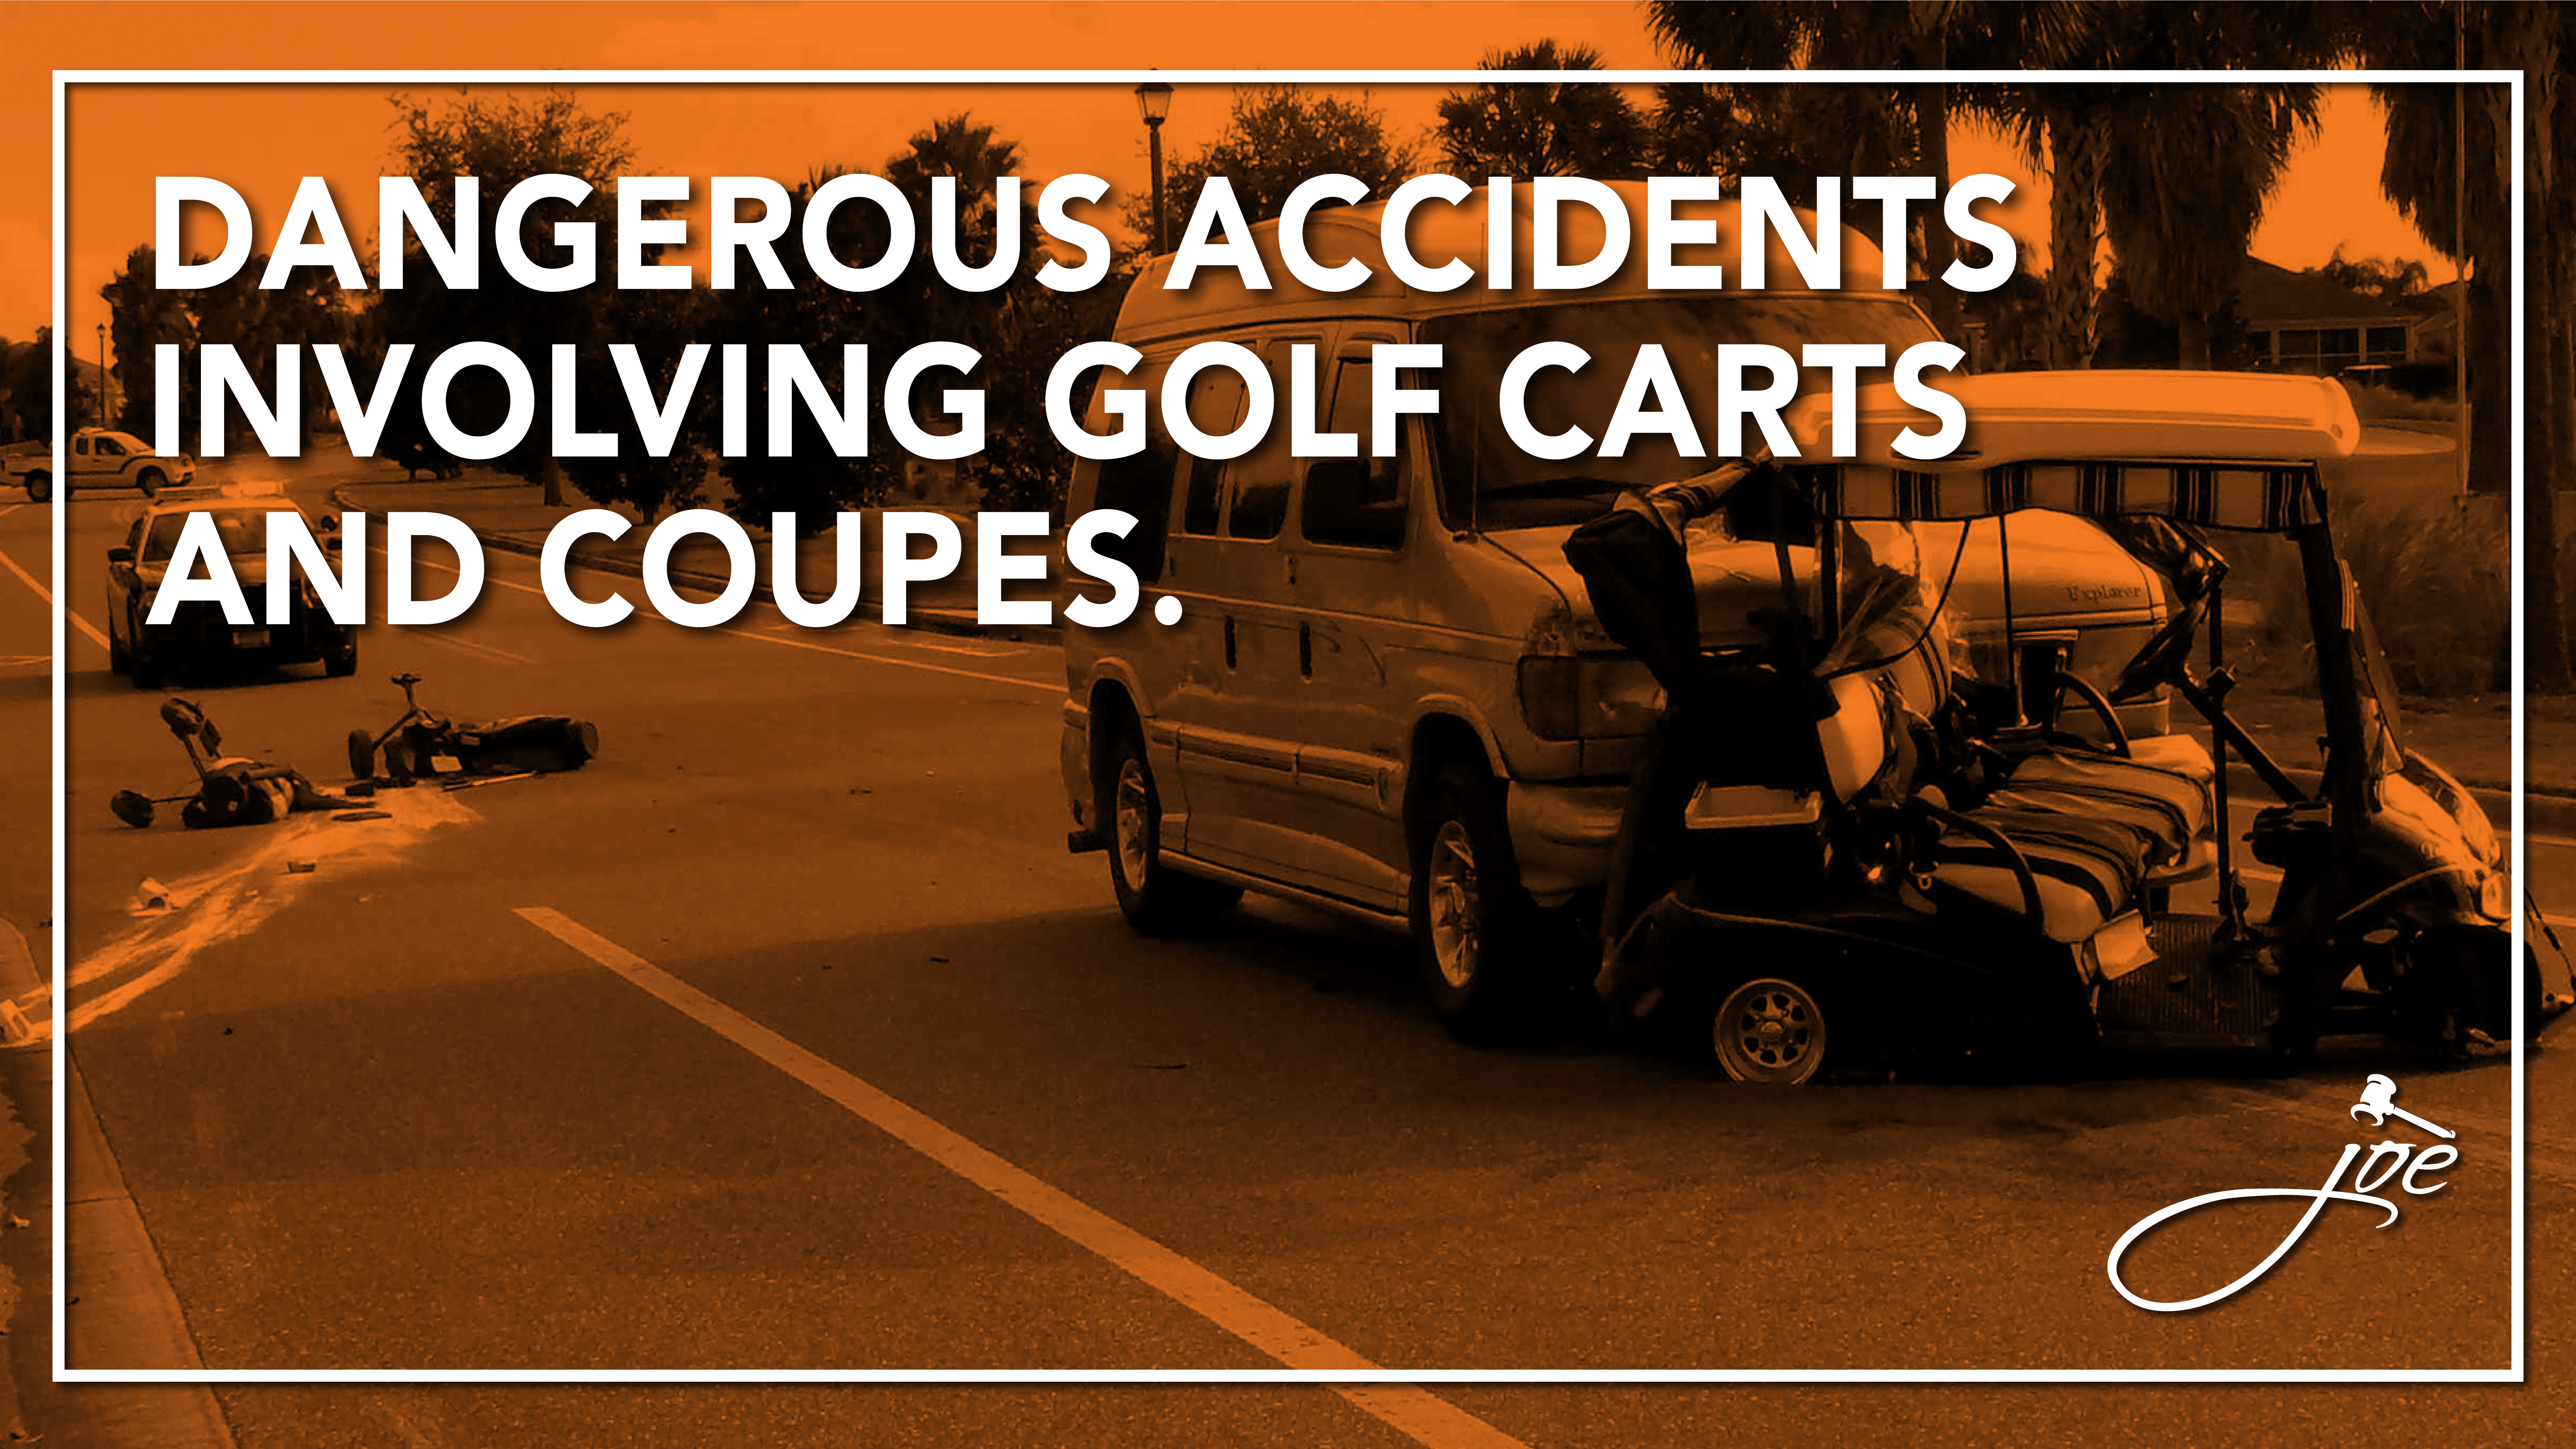 I Rented A Golf Cart And Was Involved In A Dangerous Wreck – What Next?